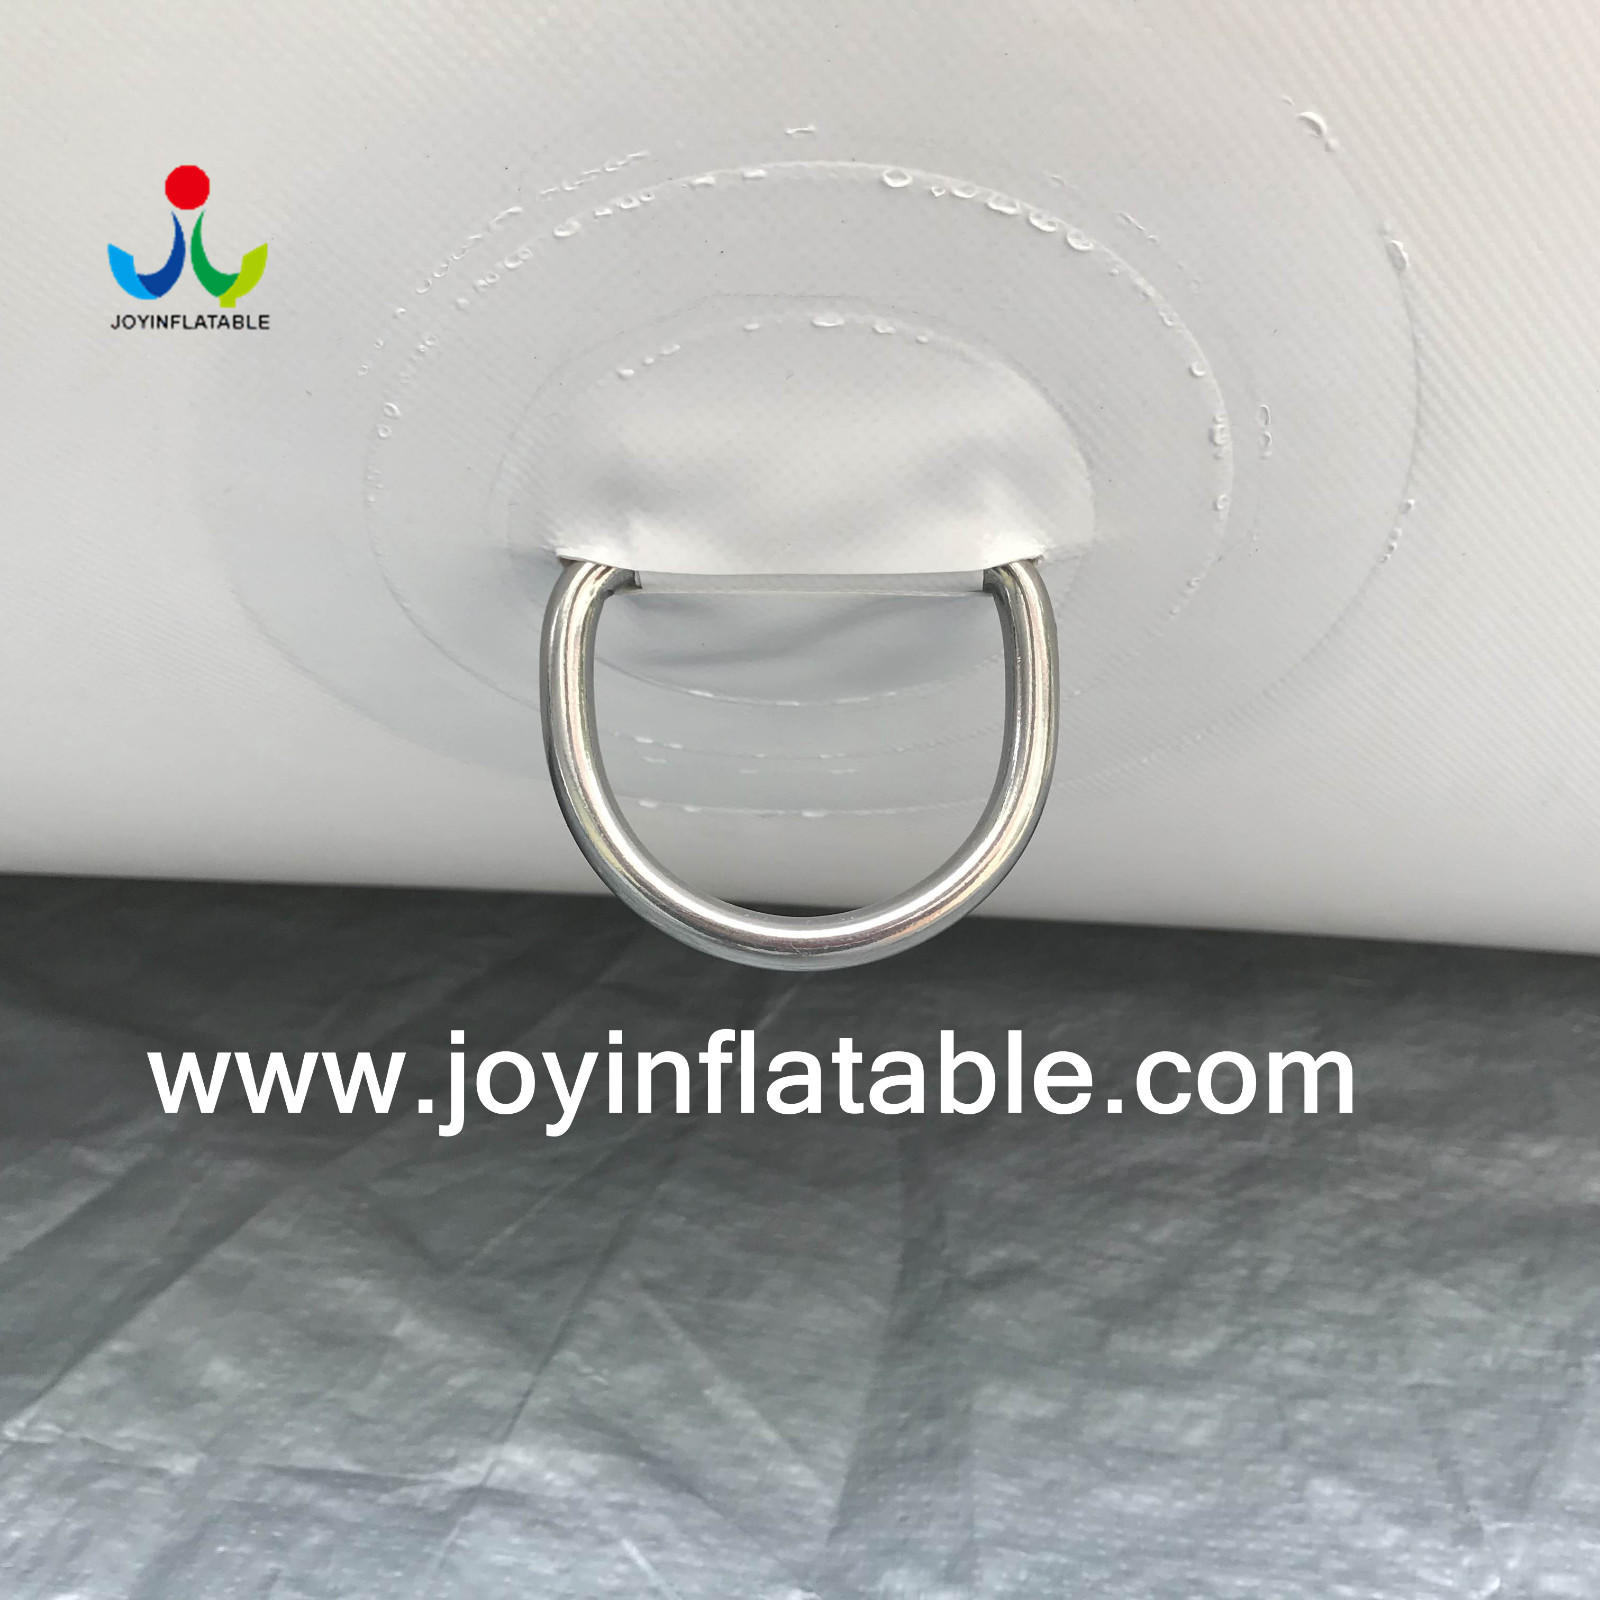 JOY Inflatable inflatable giant tent manufacturer for outdoor